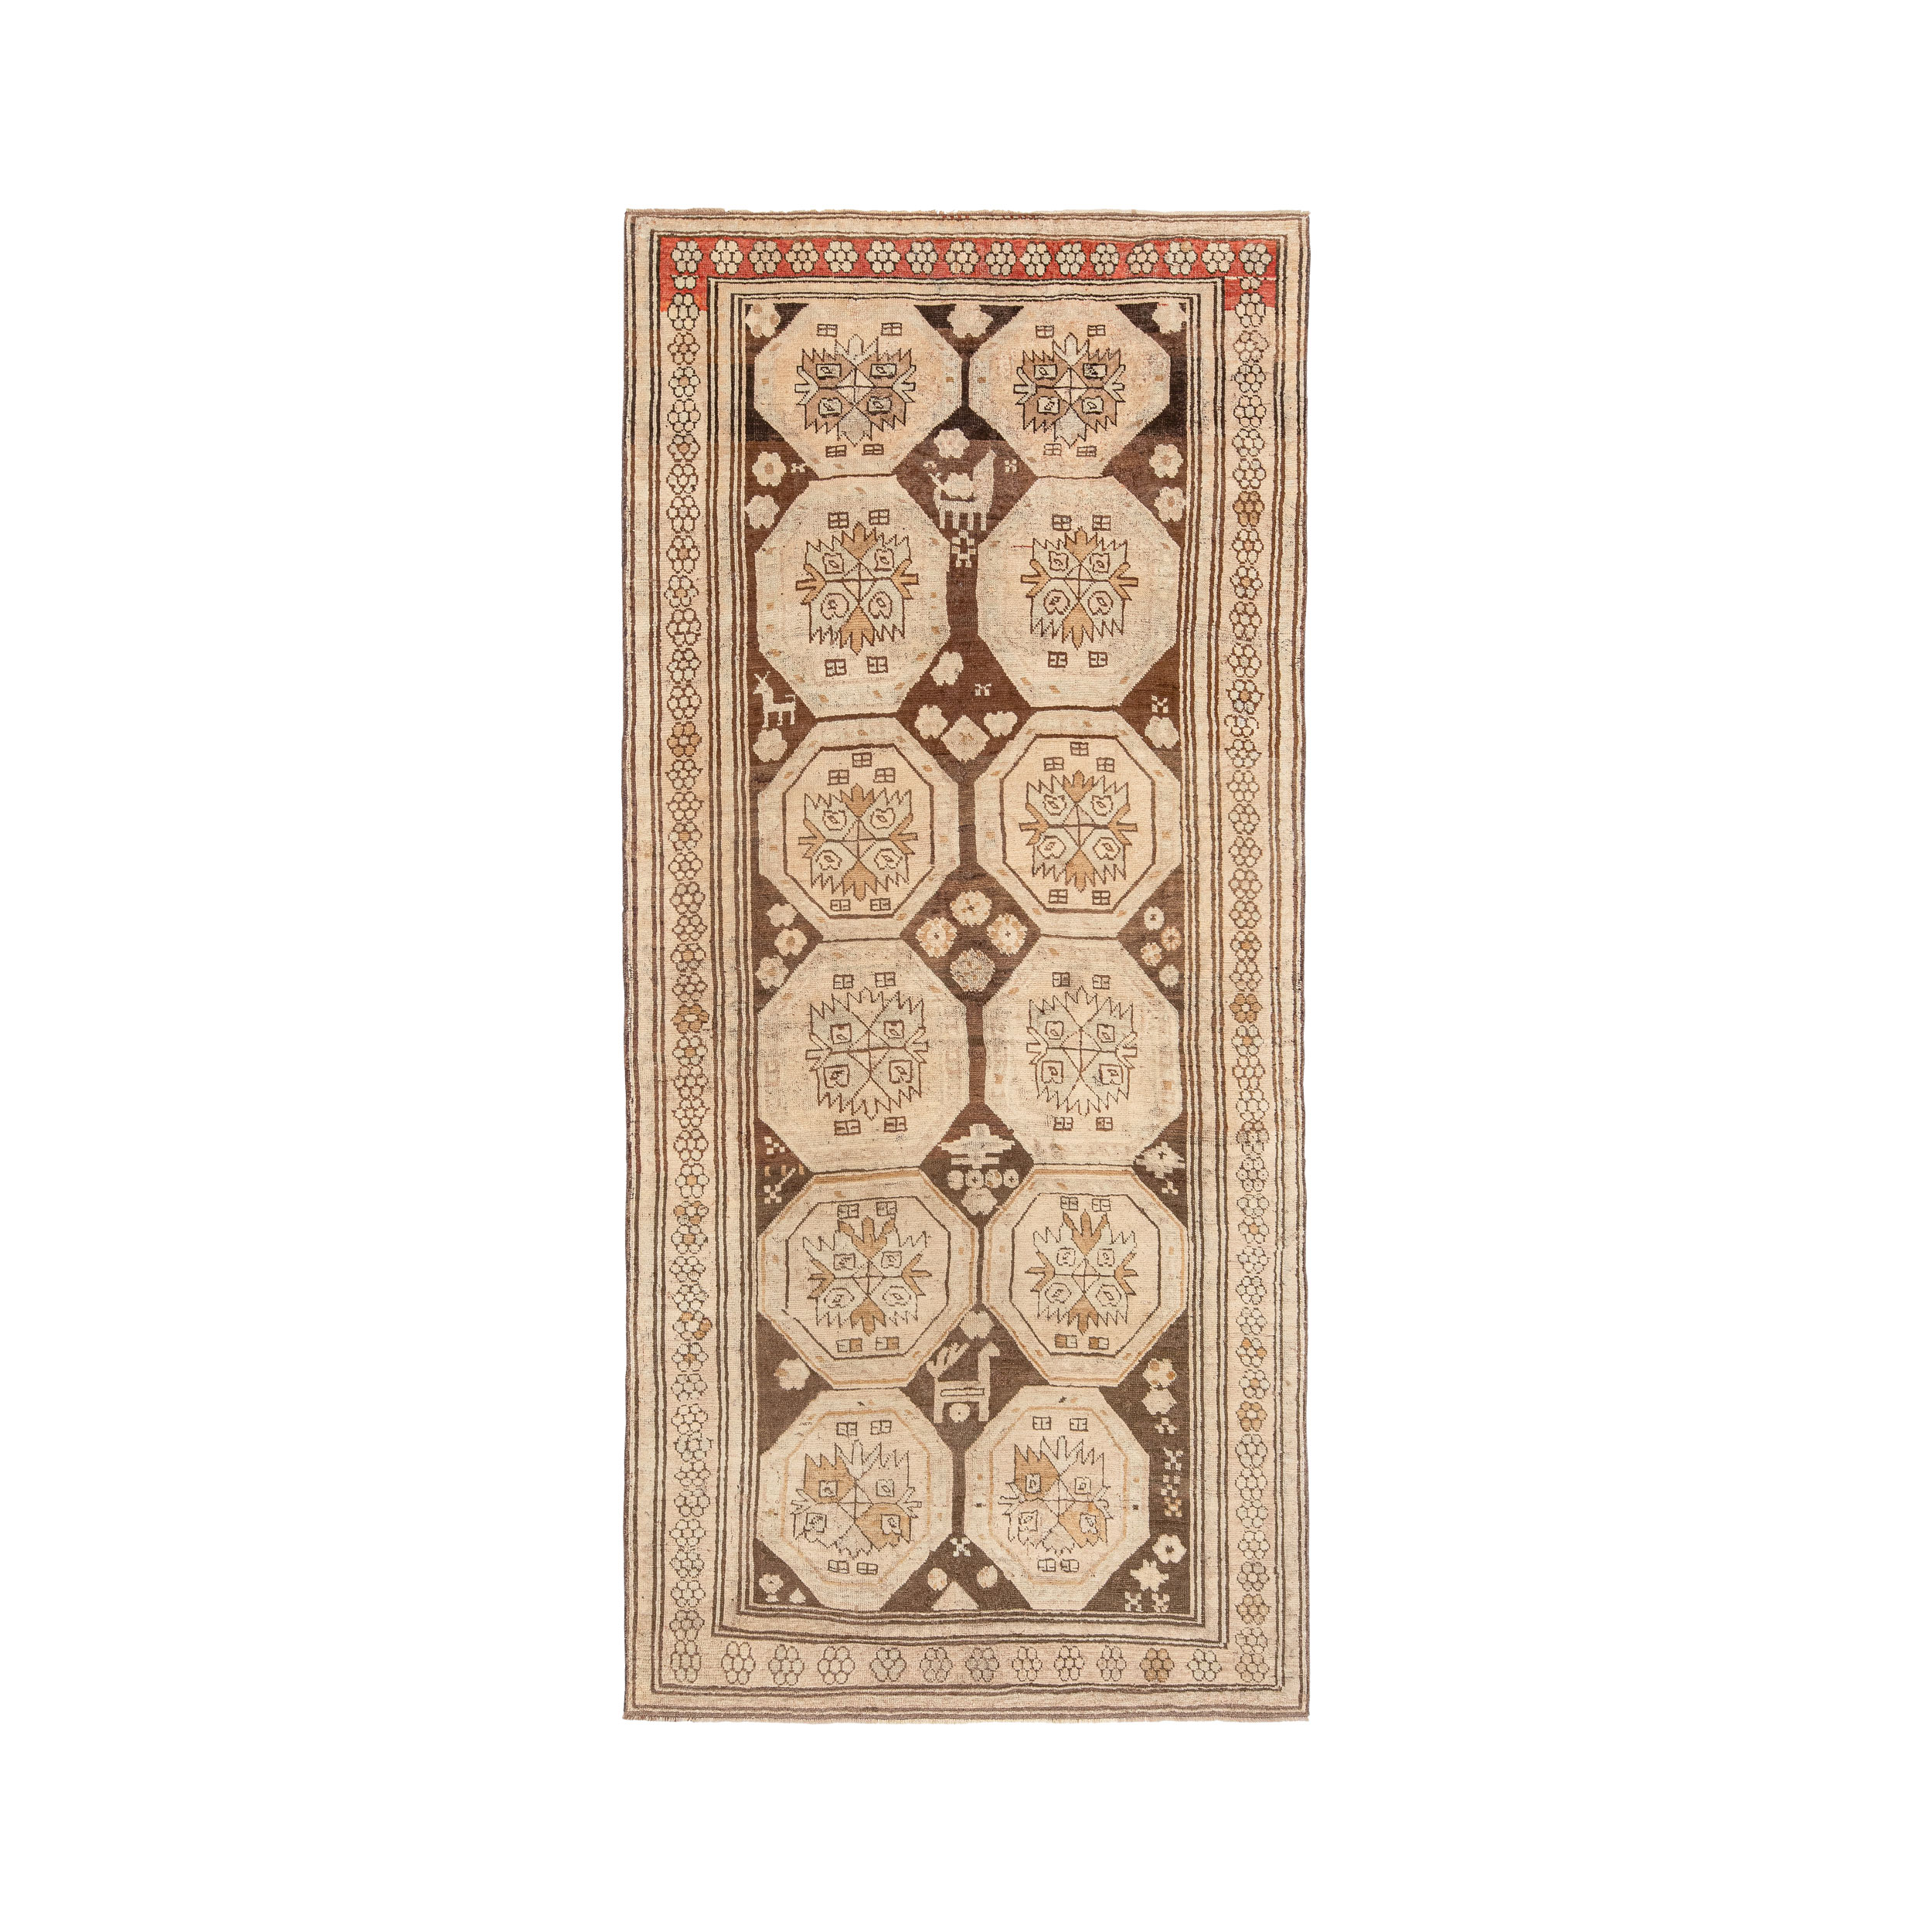 This Kurdish rug is  Hand-knotted and made of 100% wool.